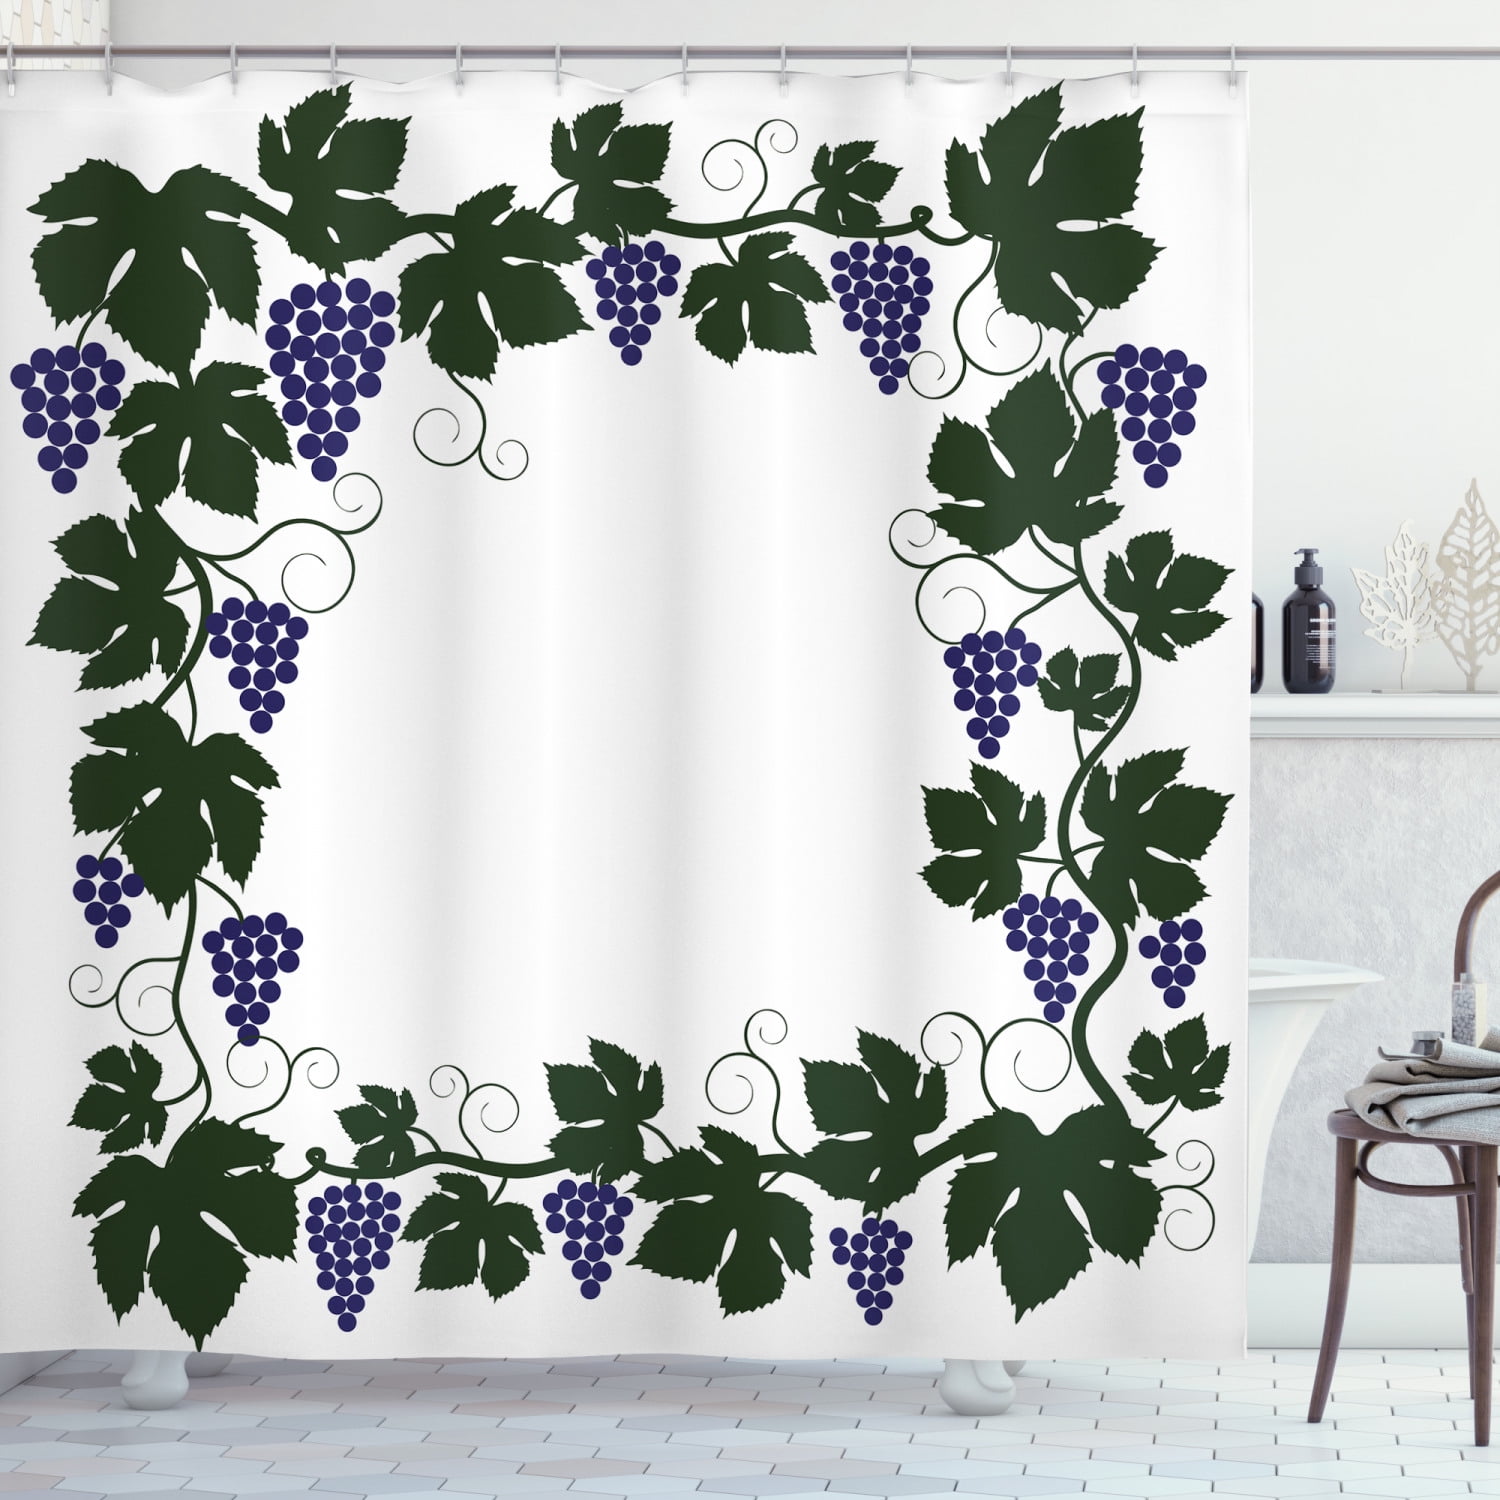 Removable Water-Activated Wallpaper Green Branches Vine Spring Summer Sprouts